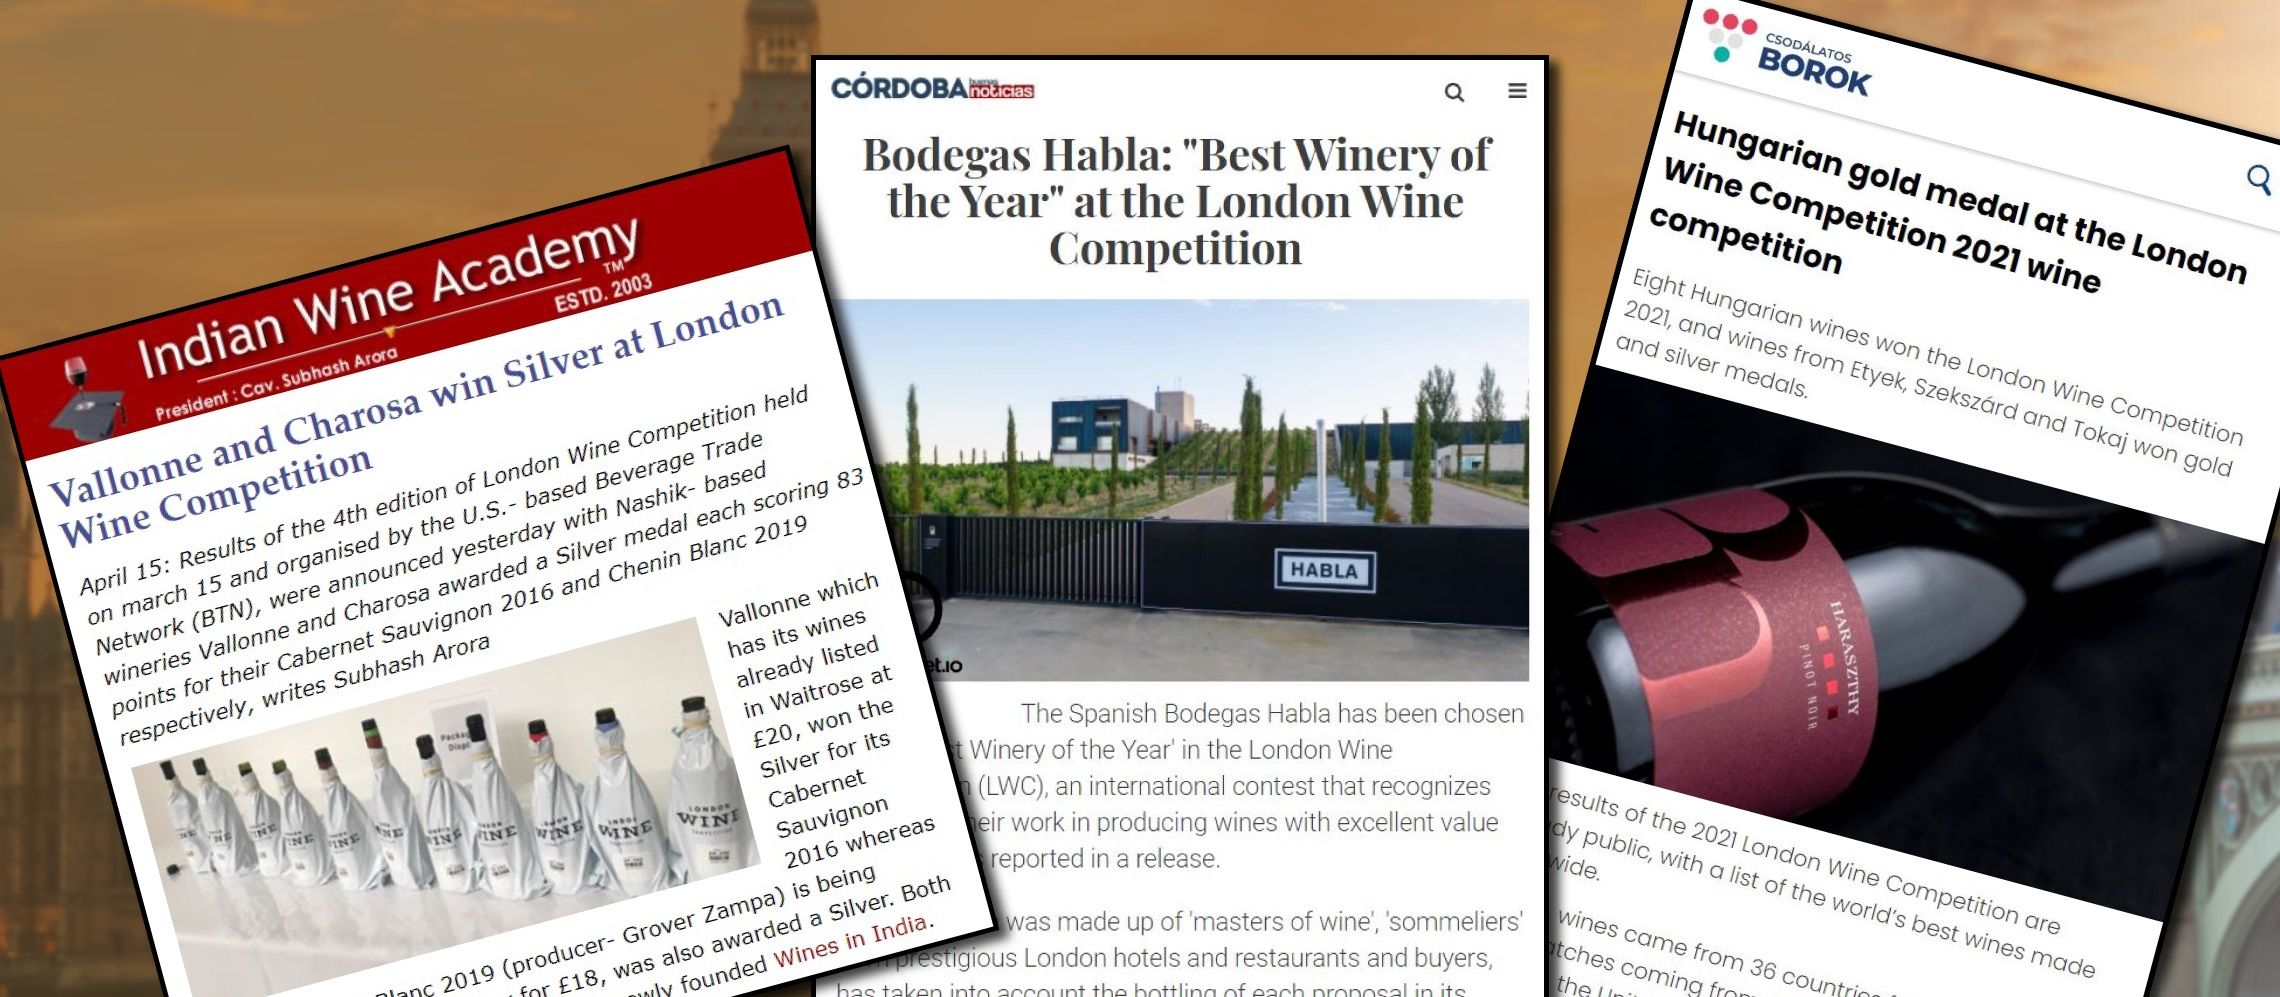 Photo for: Extensive Media Coverage for London Wine Competition Winners